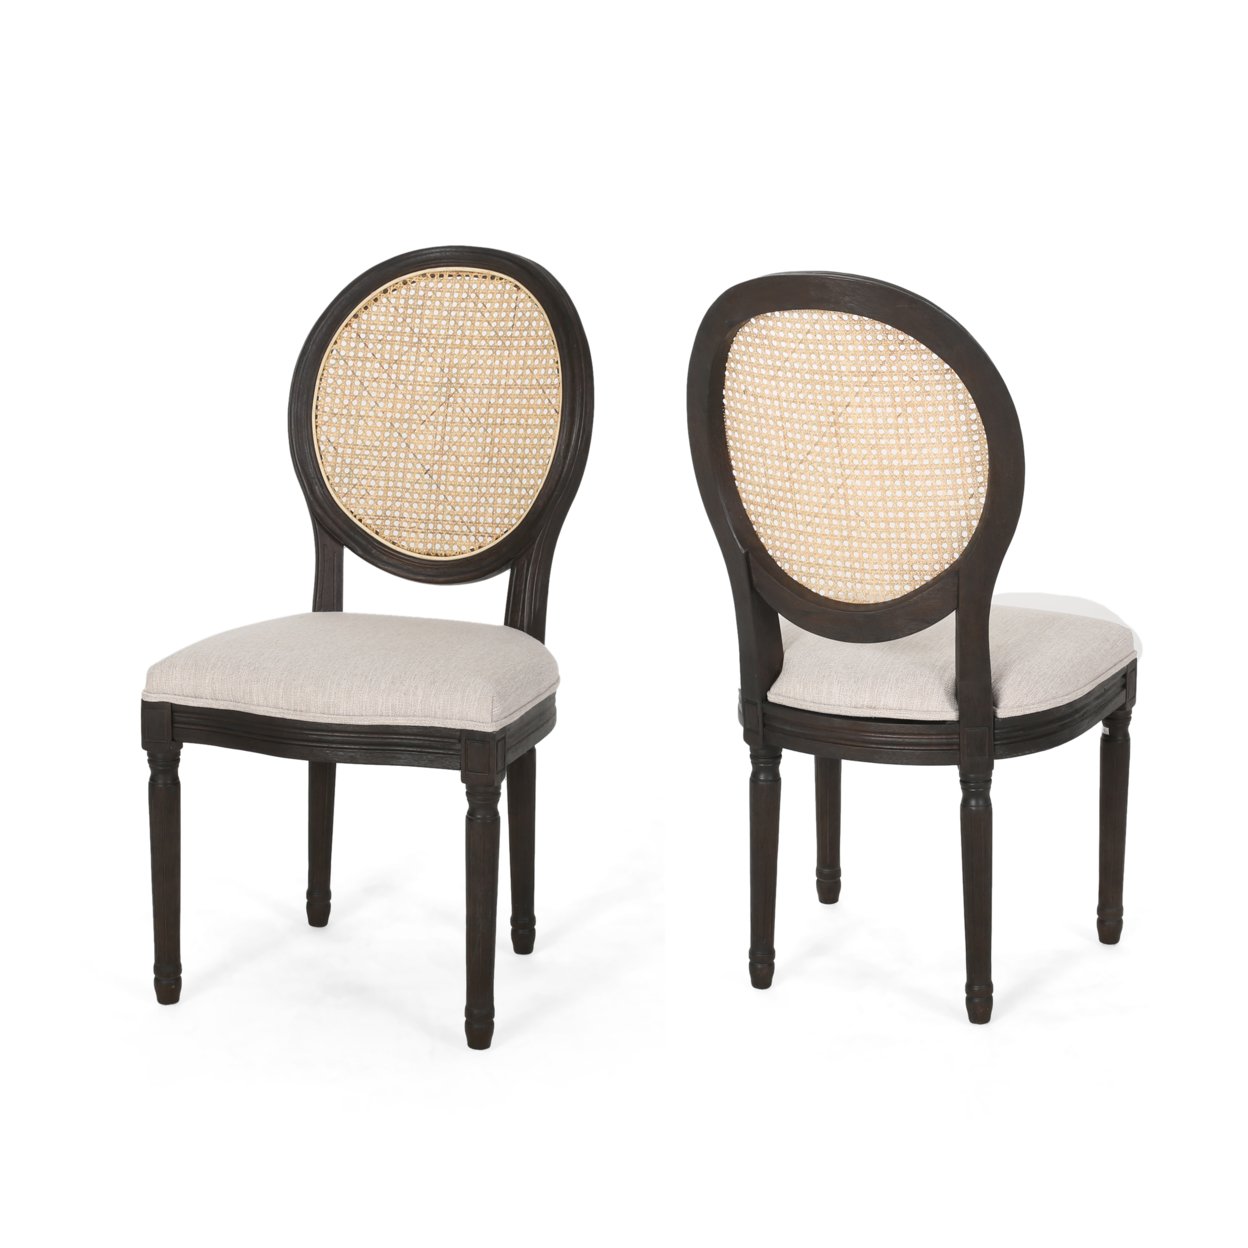 Laney Wooden Dining Chairs With Beige Cushions (Set Of 2) - Beige + Natural + Black